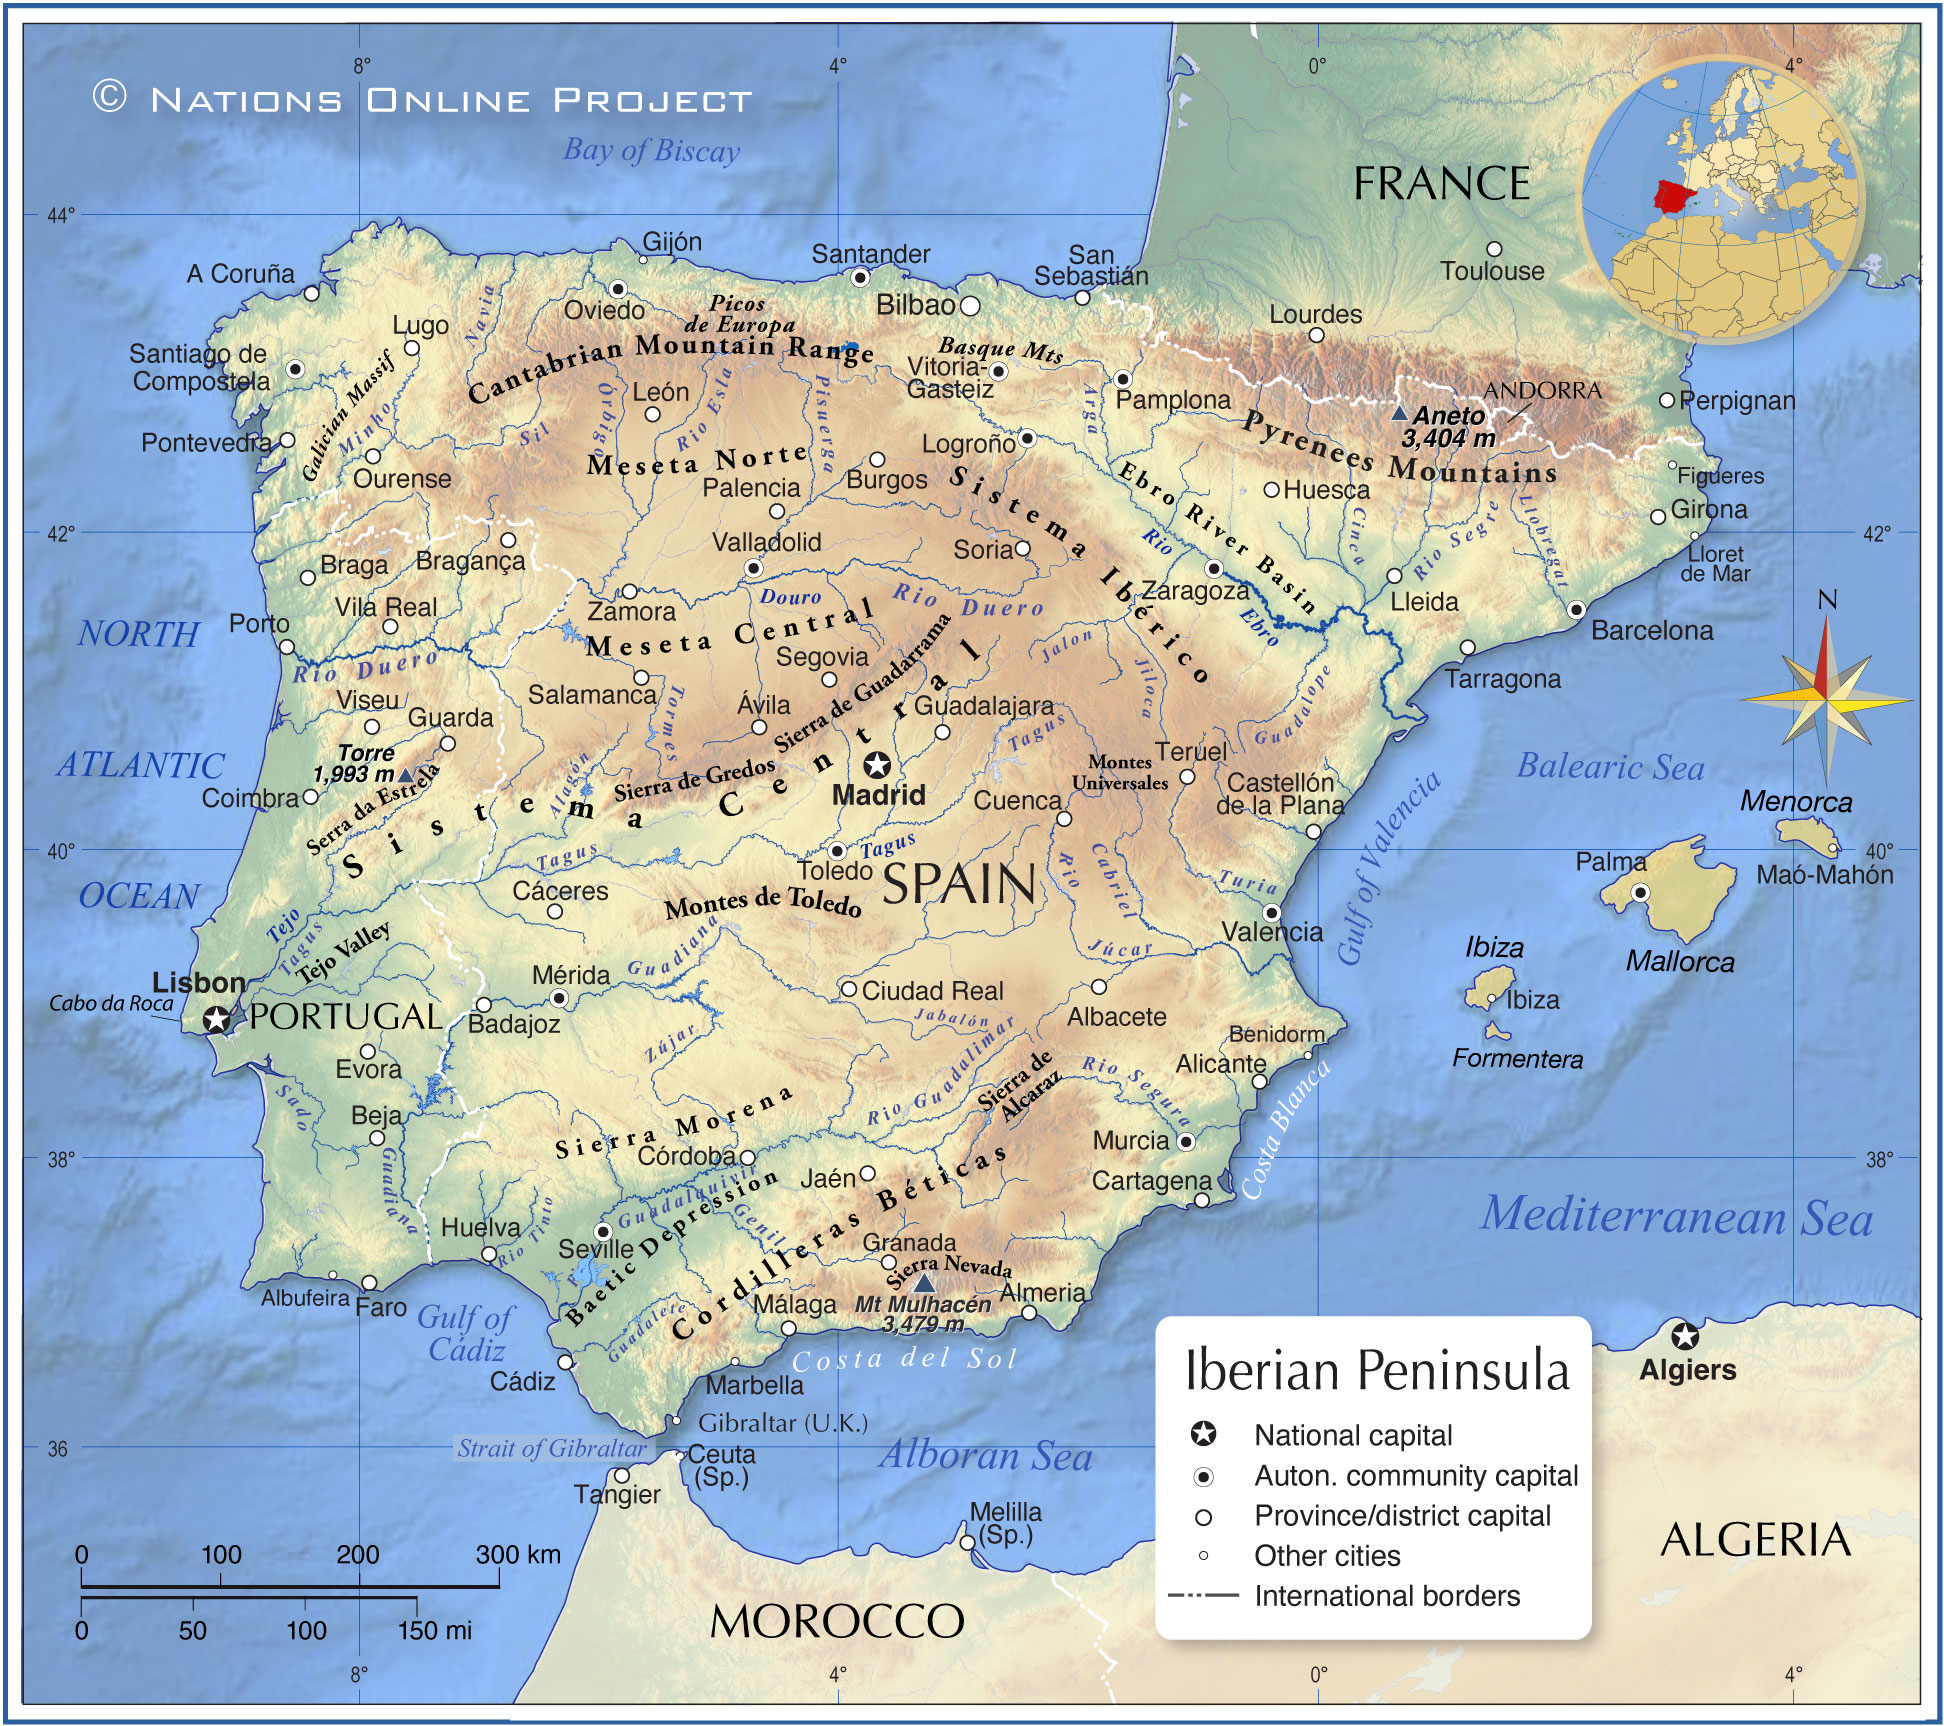 Shaded relief map of the Iberian Peninsula